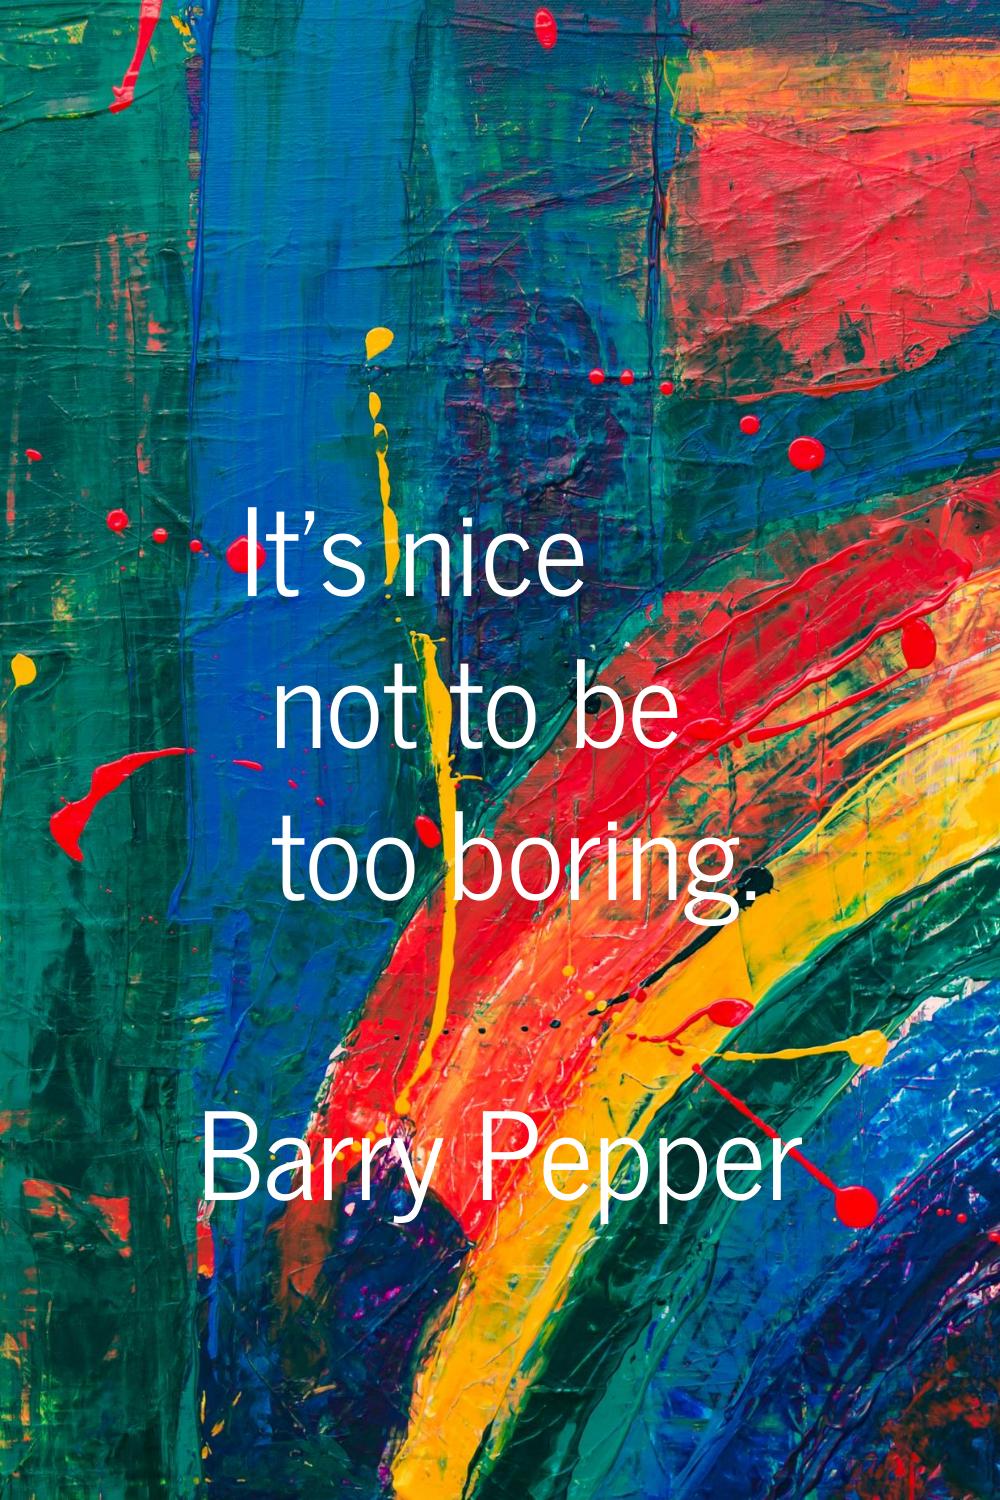 It's nice not to be too boring.